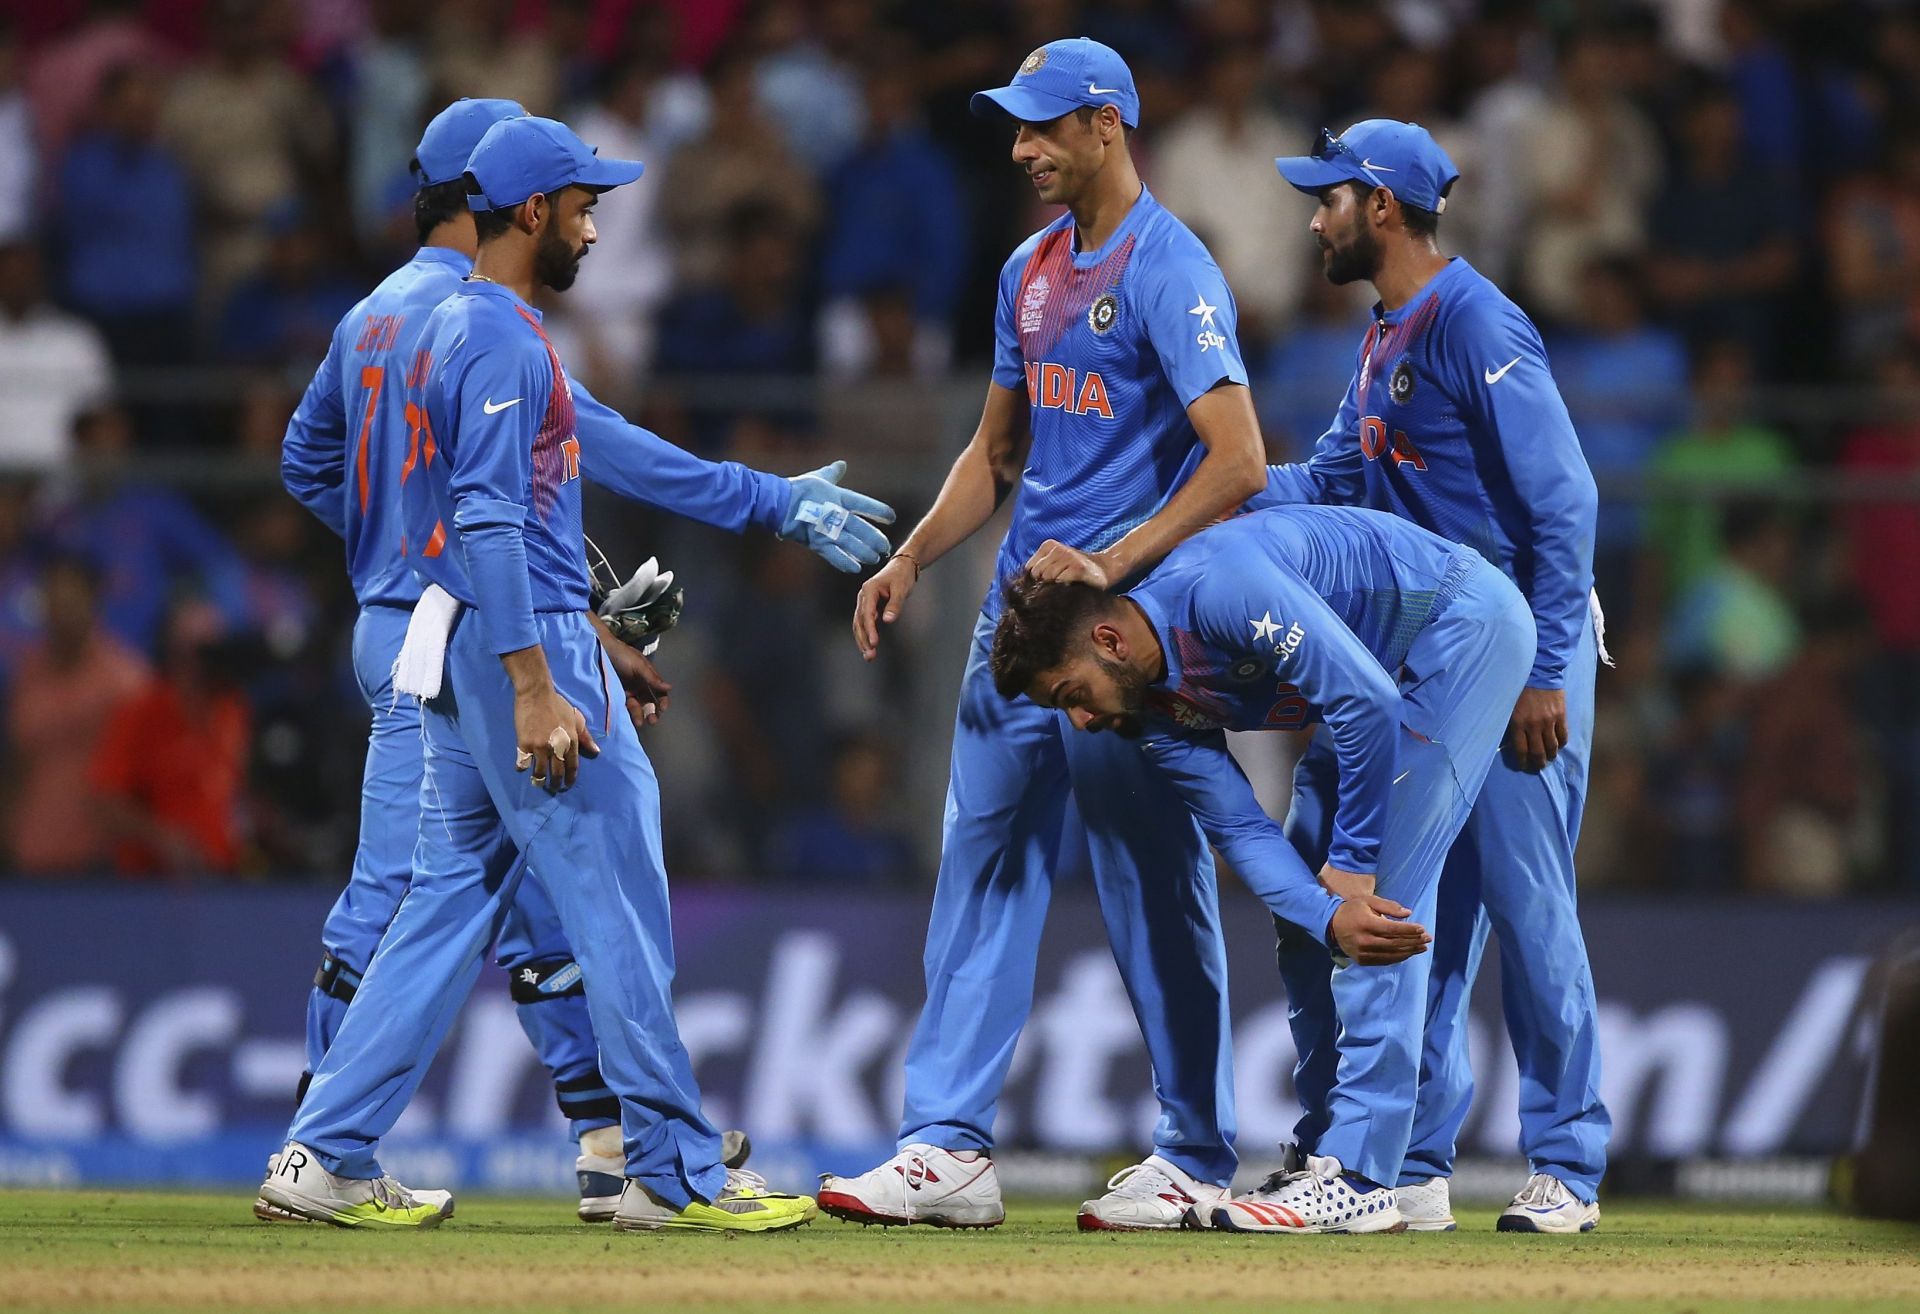 India were knocked out in the semi-final of the 2016 edition. Pic: Getty Images